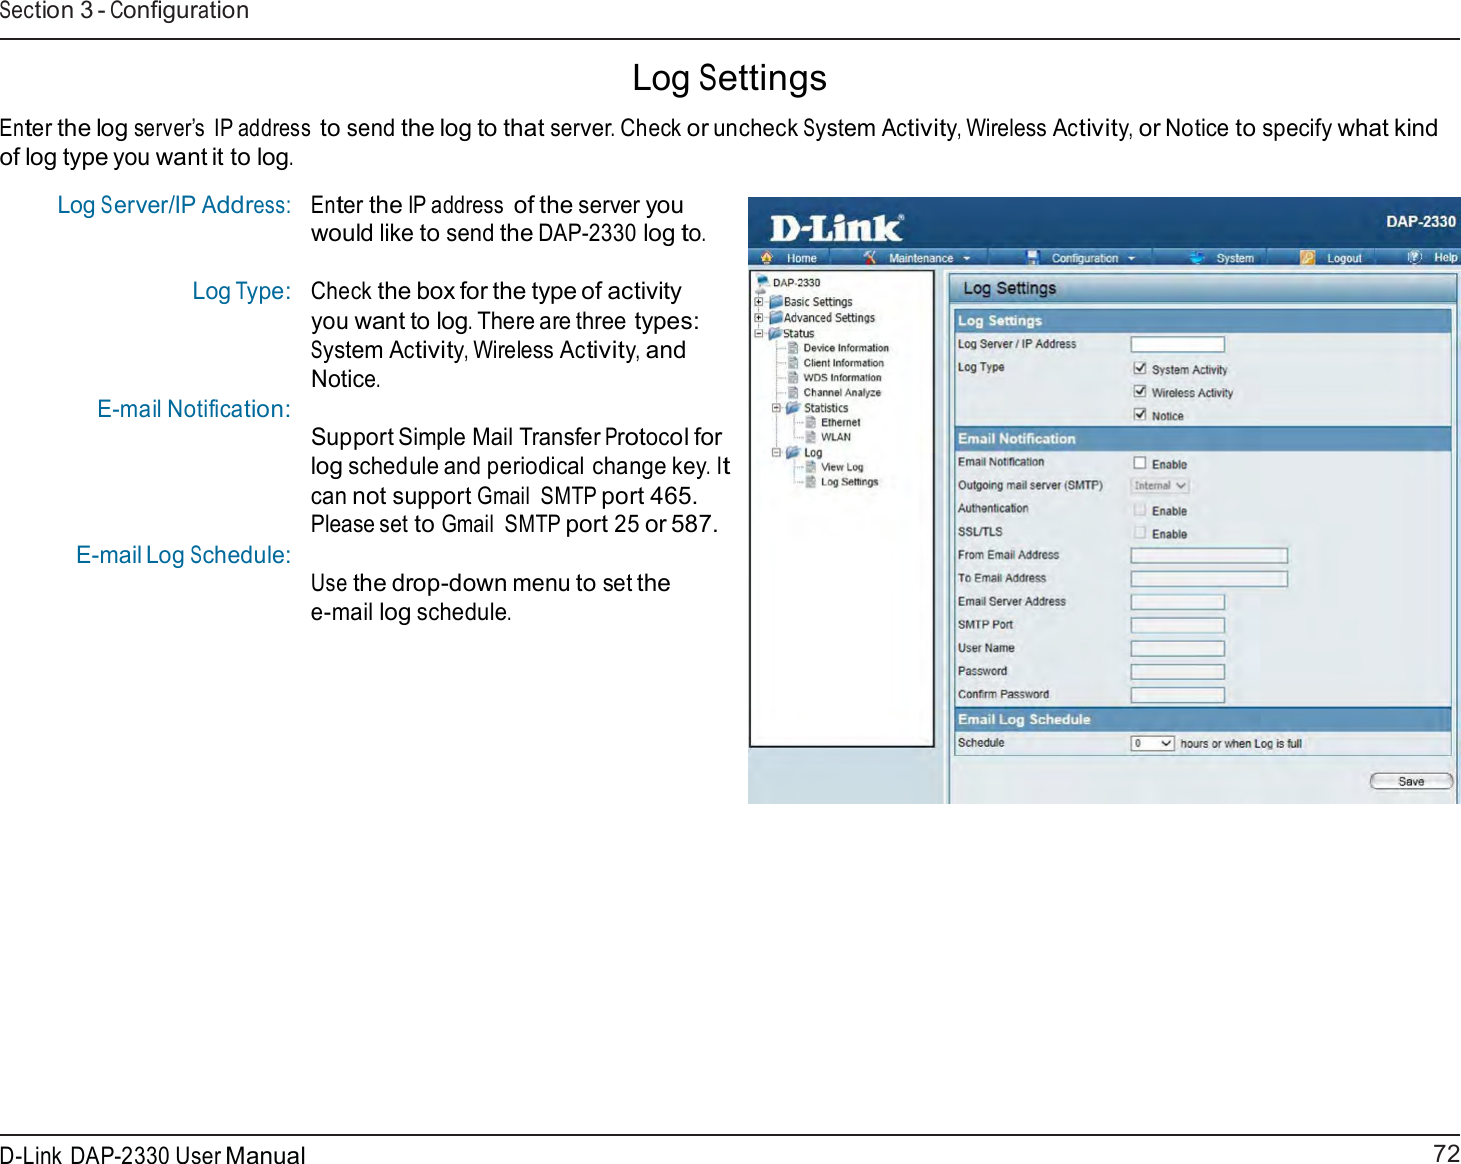 72 D-Link DAP-2330 User ManualSection 3 - Configuration      Log Settings  Enter the log server’s IP address to send the log to that server. Check or uncheck System Activity, Wireless Activity, or Notice to specify what kind of log type you want it to log.  Log Server/IP Address: Log Type:   E-mail Notification:       E-mail Log Schedule: Enter the IP address of the server you would like to send the DAP-2330 log to.  Check the box for the type of activity you want to log. There are three types: System Activity, Wireless Activity, and Notice.  Support Simple Mail Transfer Protocol for log schedule and periodical change key. It can not support Gmail  SMTP port 465. Please set to Gmail  SMTP port 25 or 587.  Use the drop-down menu to set the e-mail log schedule. 